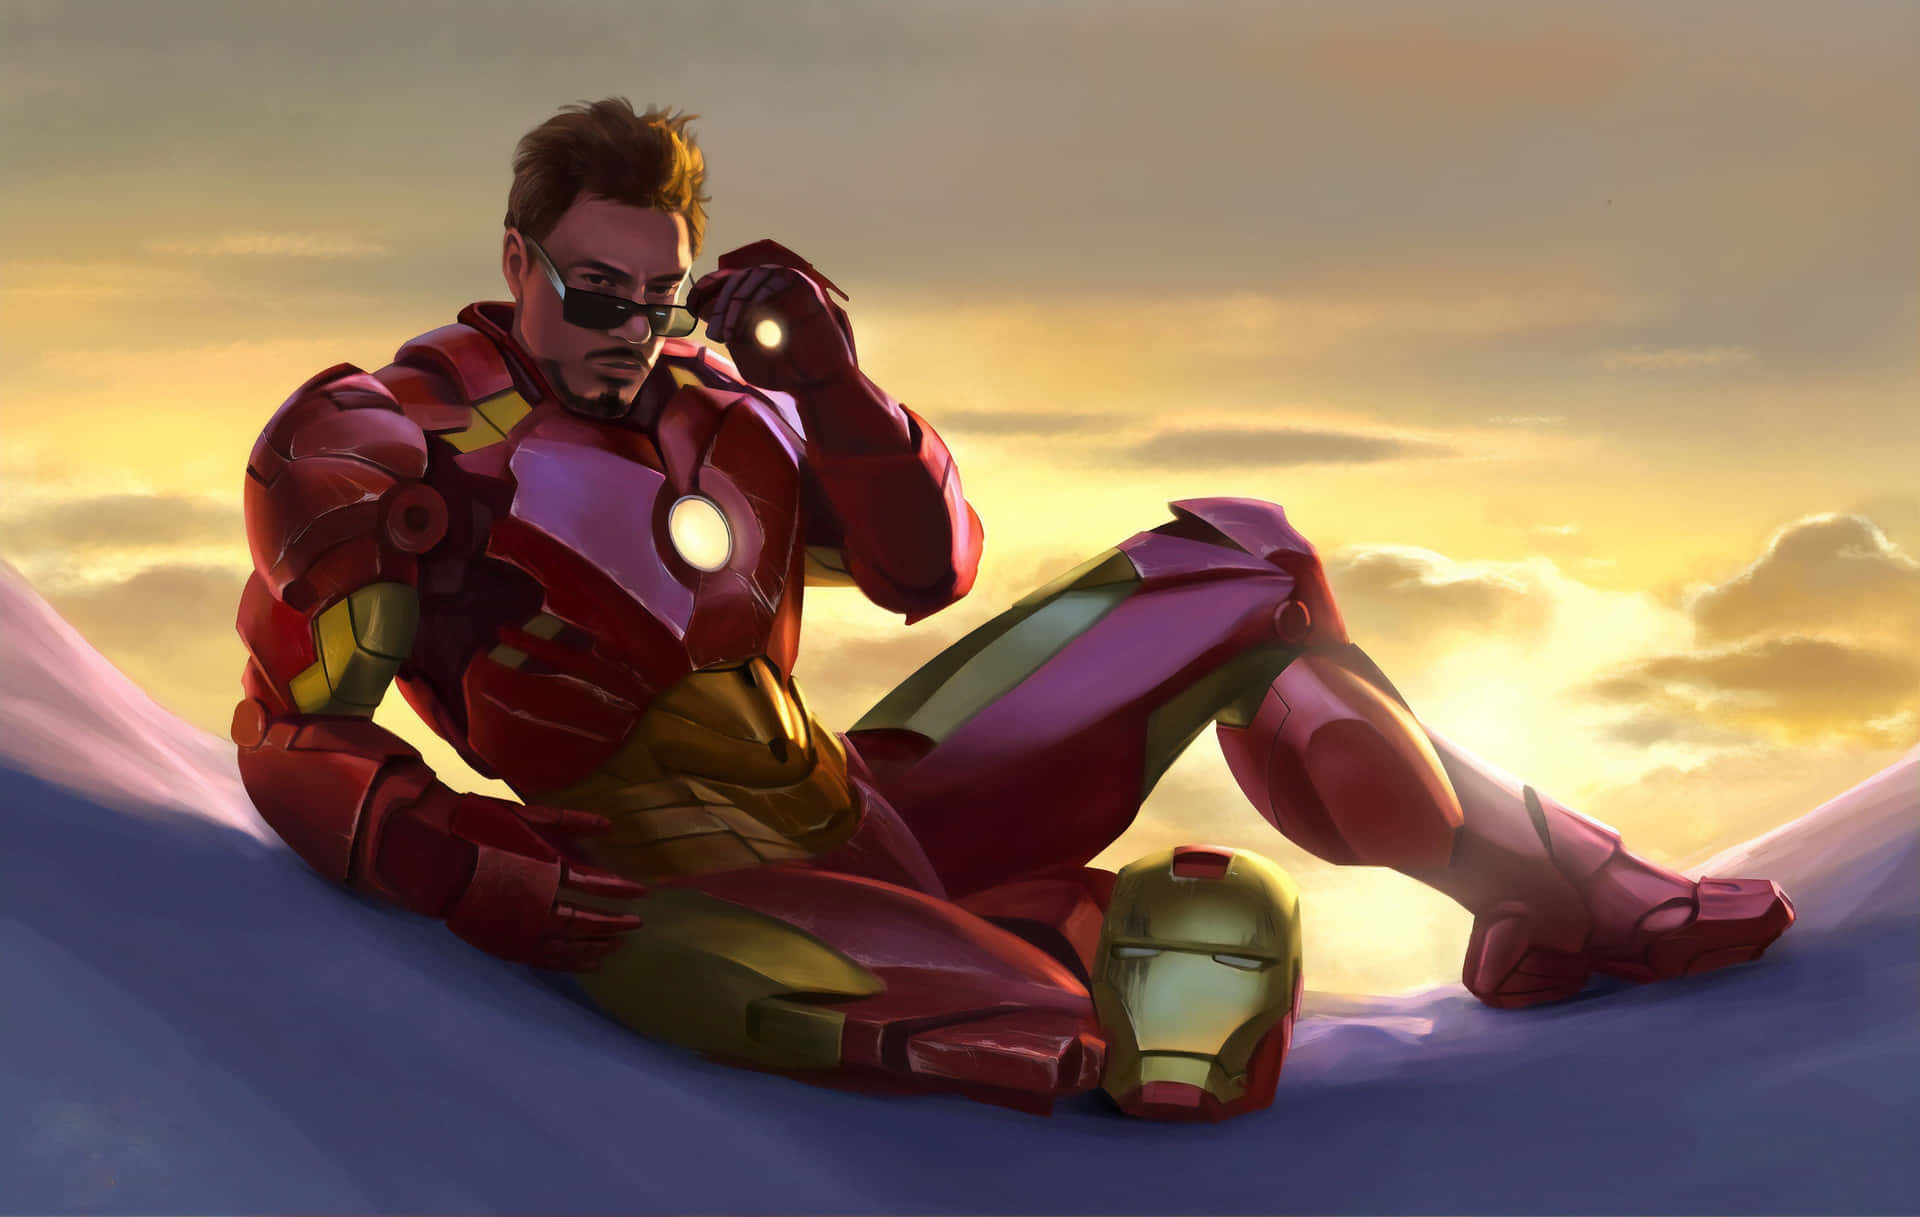 Iron Man Fan Art depicting the iconic superhero in his signature red and gold armor. Wallpaper